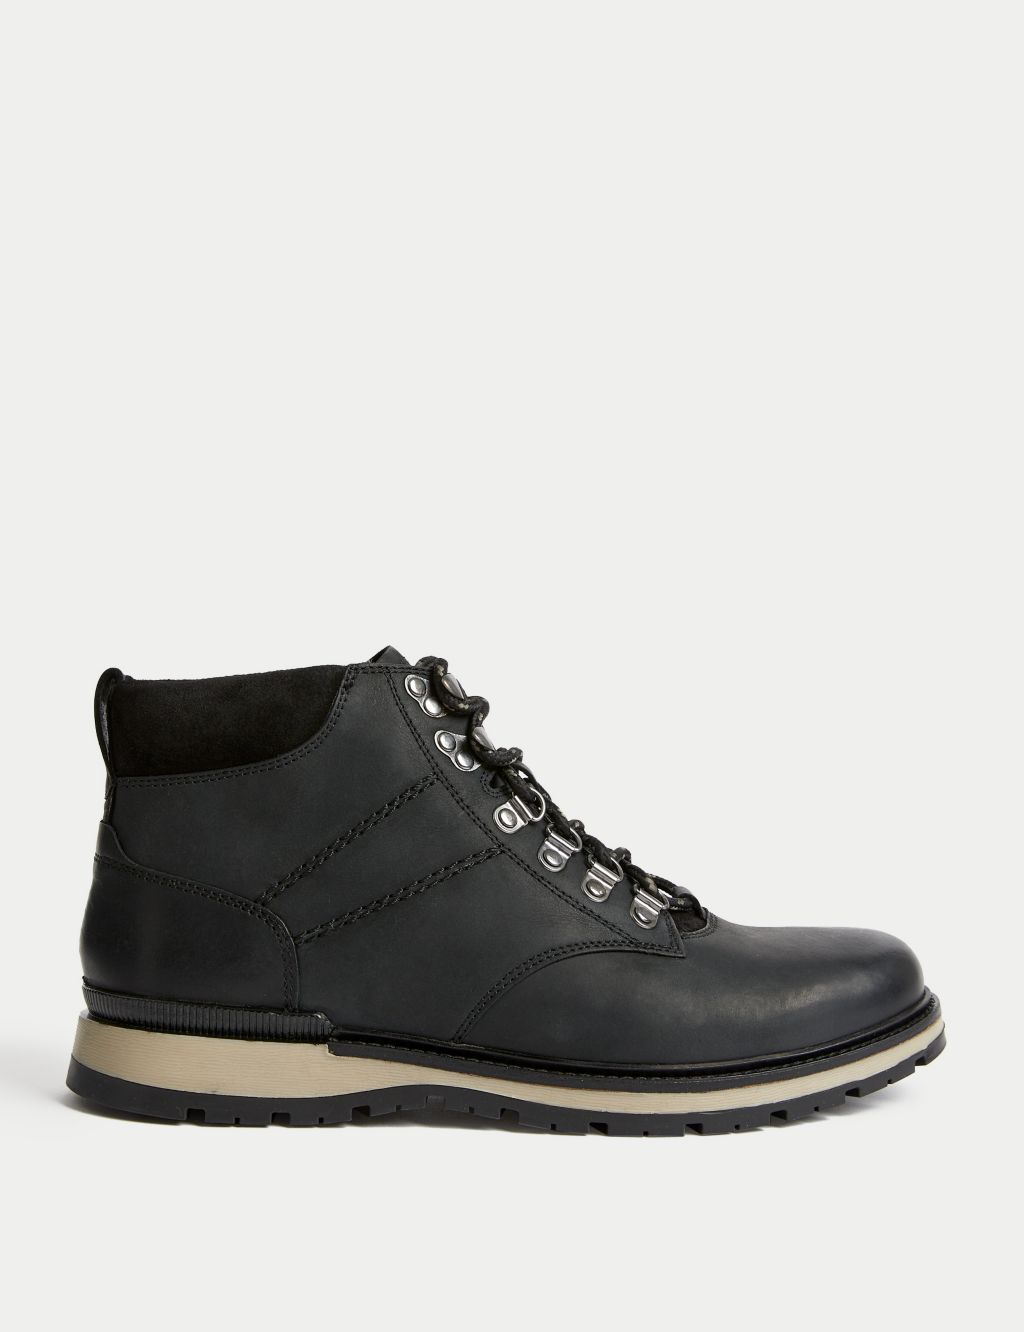 Leather Casual Boots image 1